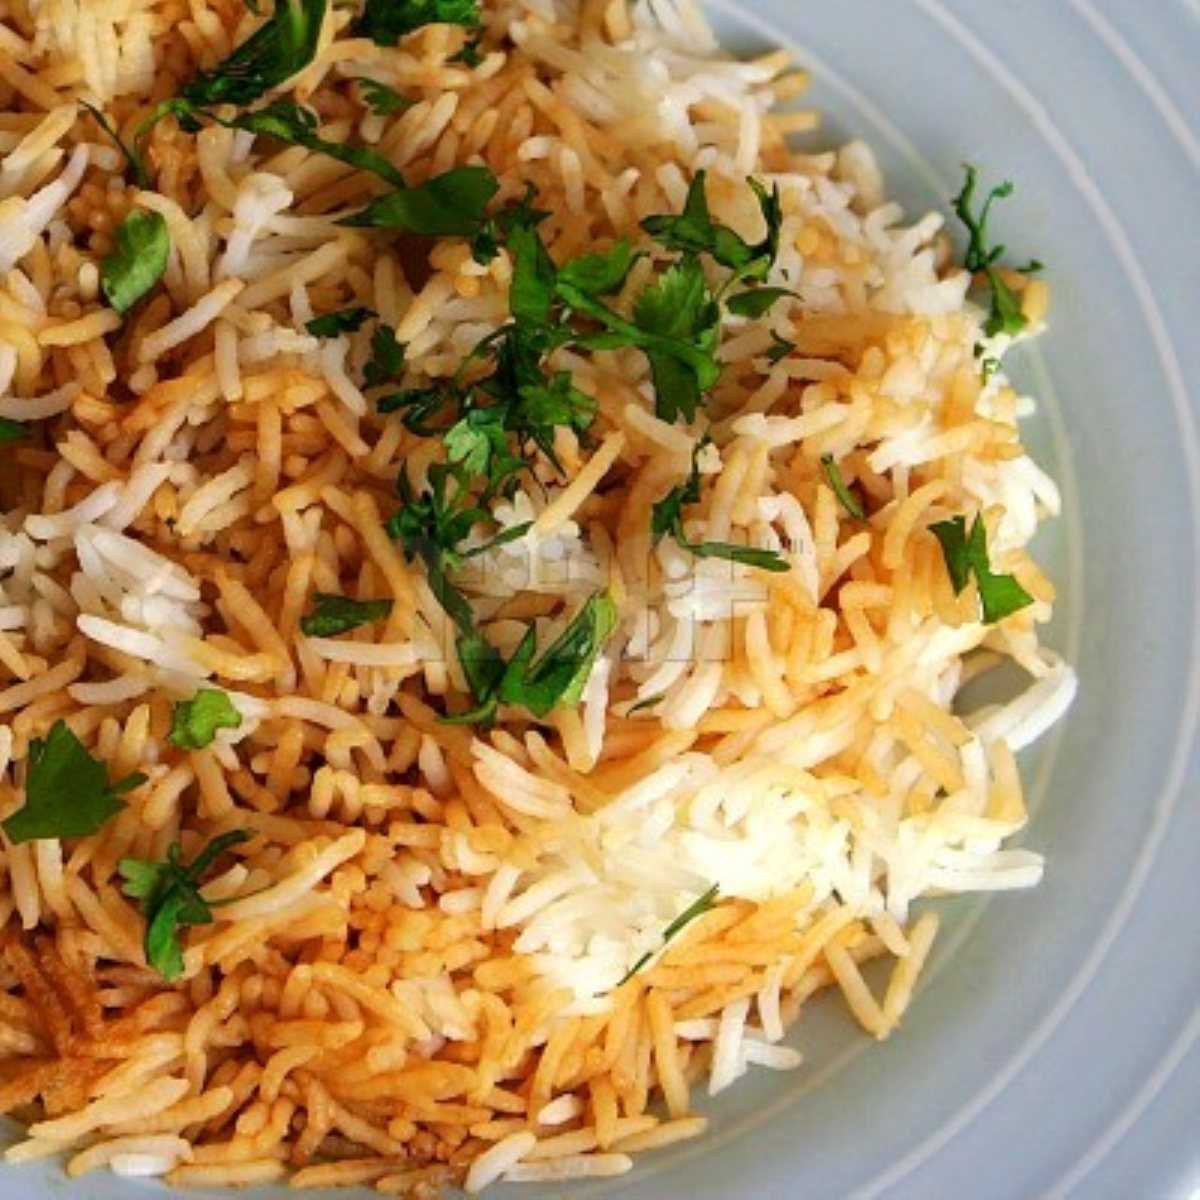 The pulao is one of the most popular dishes here.